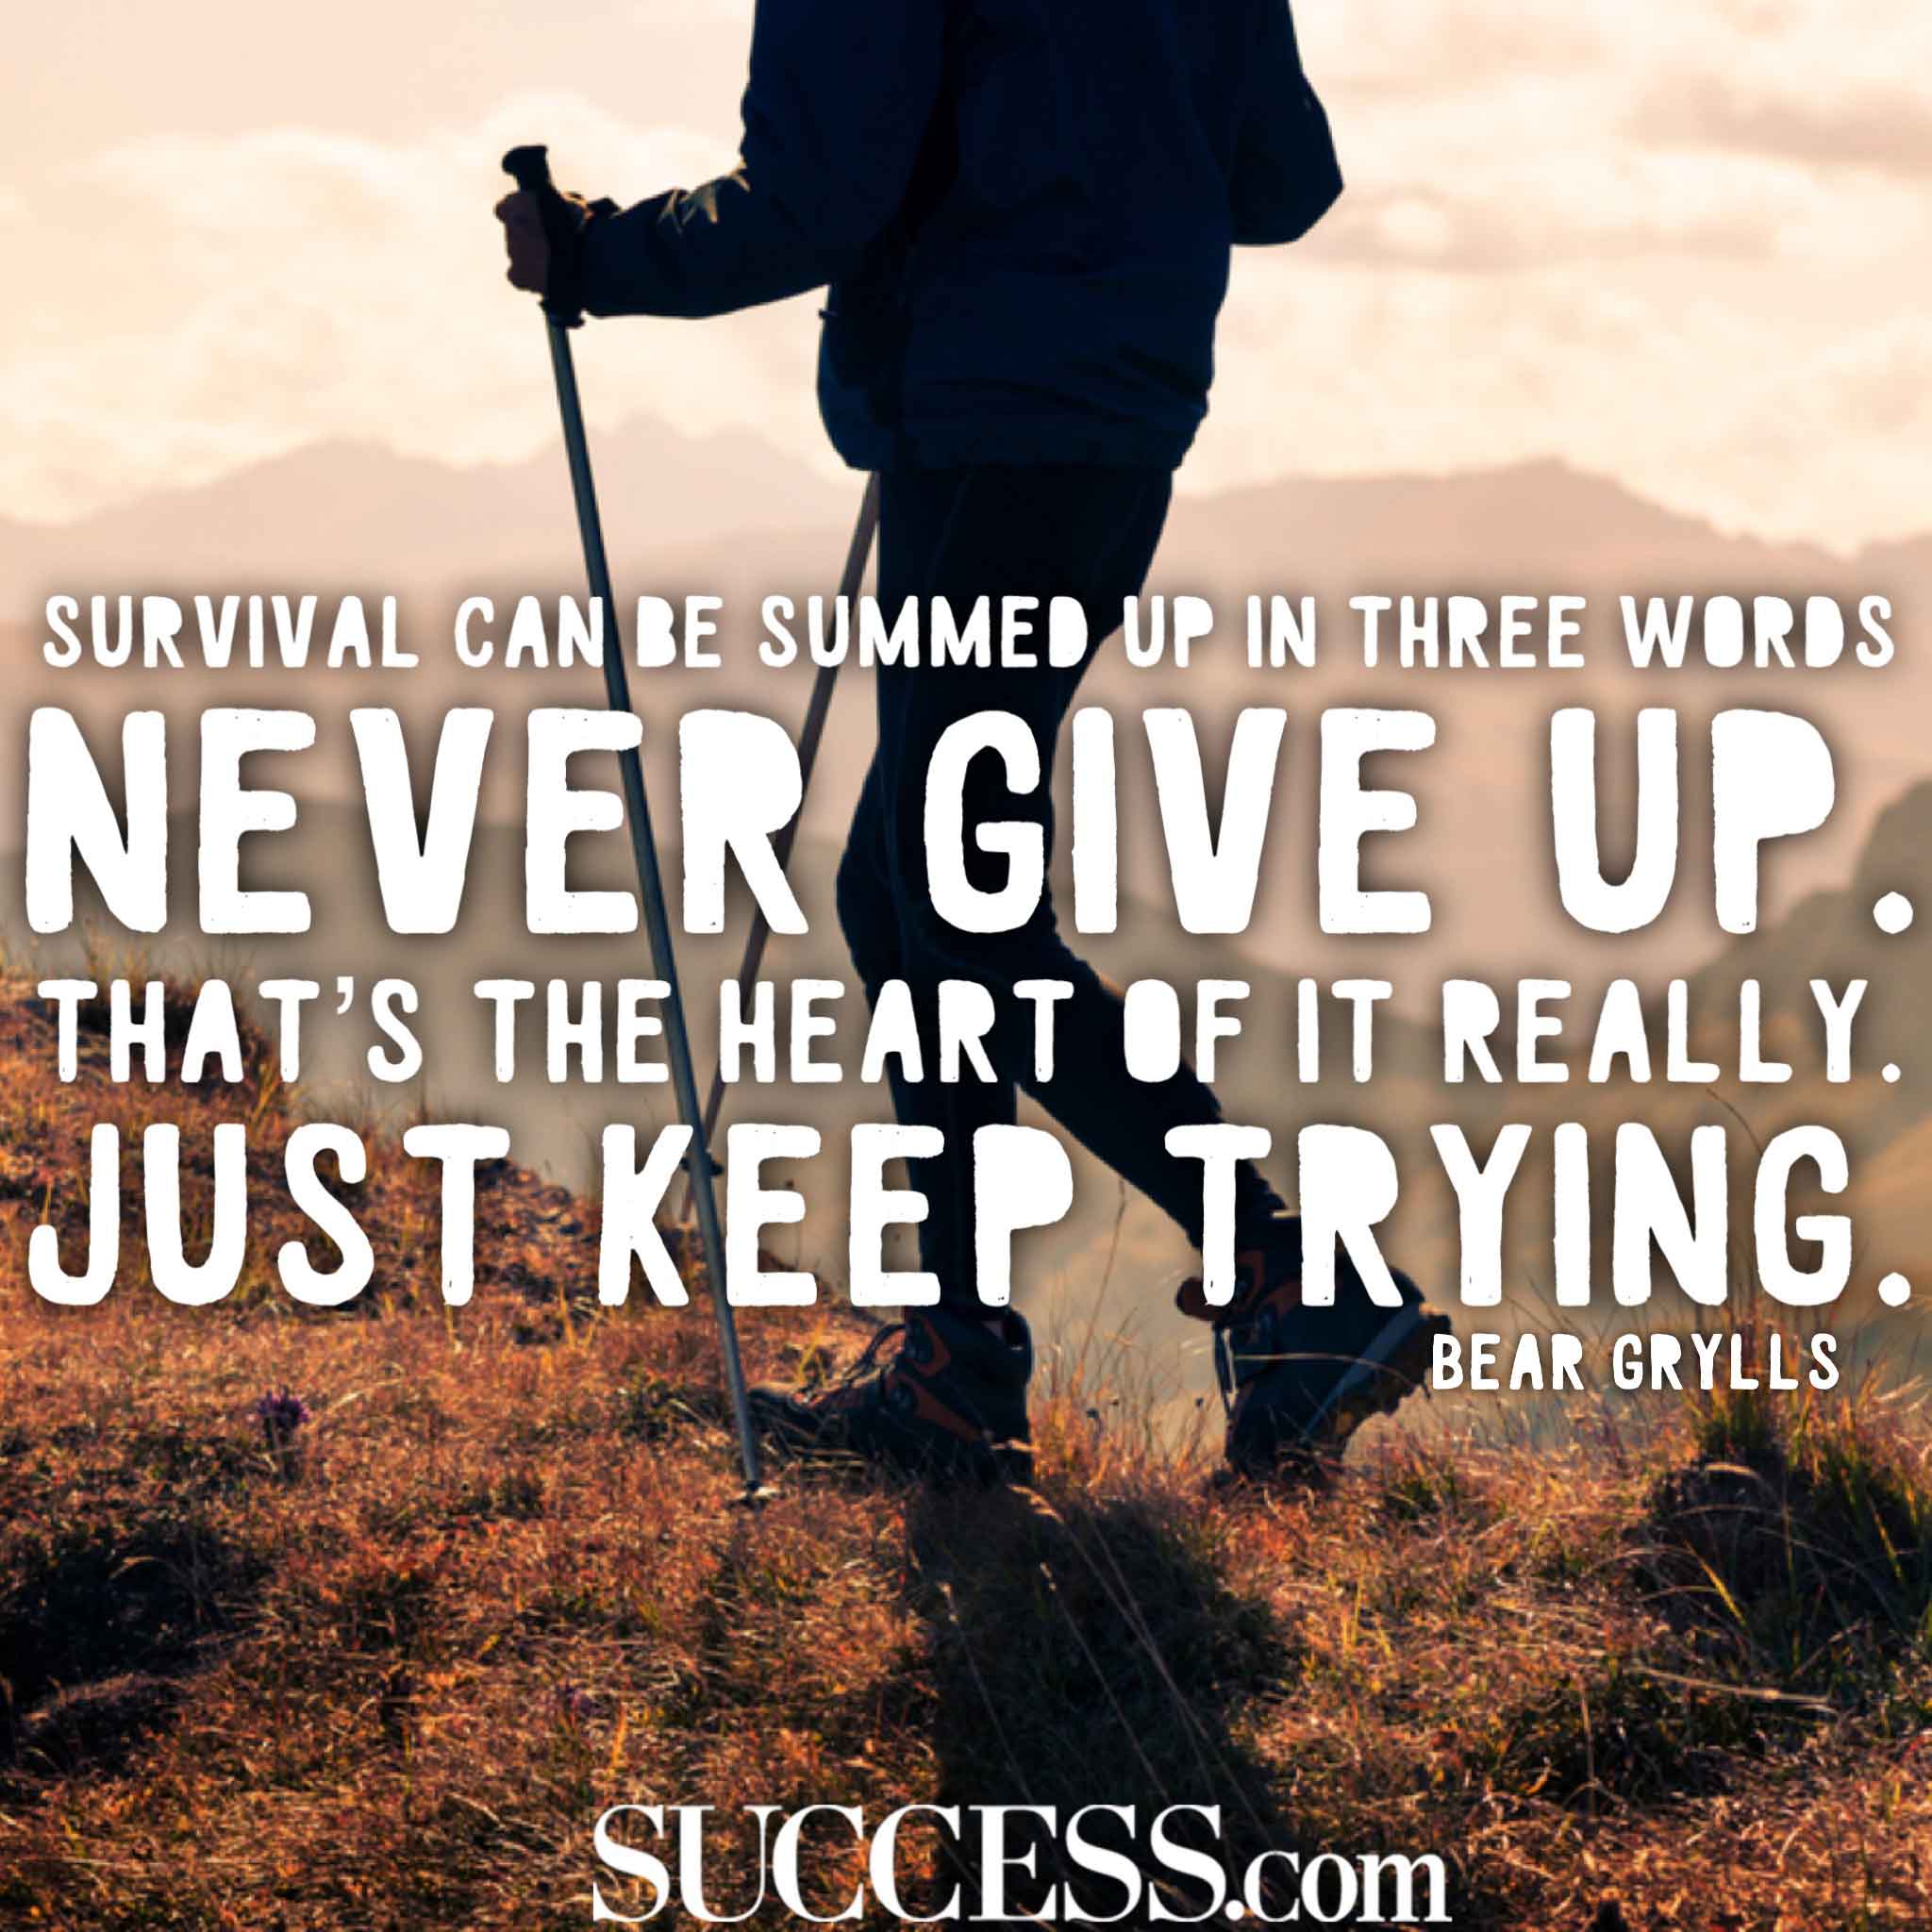 Never Give Up Inspirational Quotes